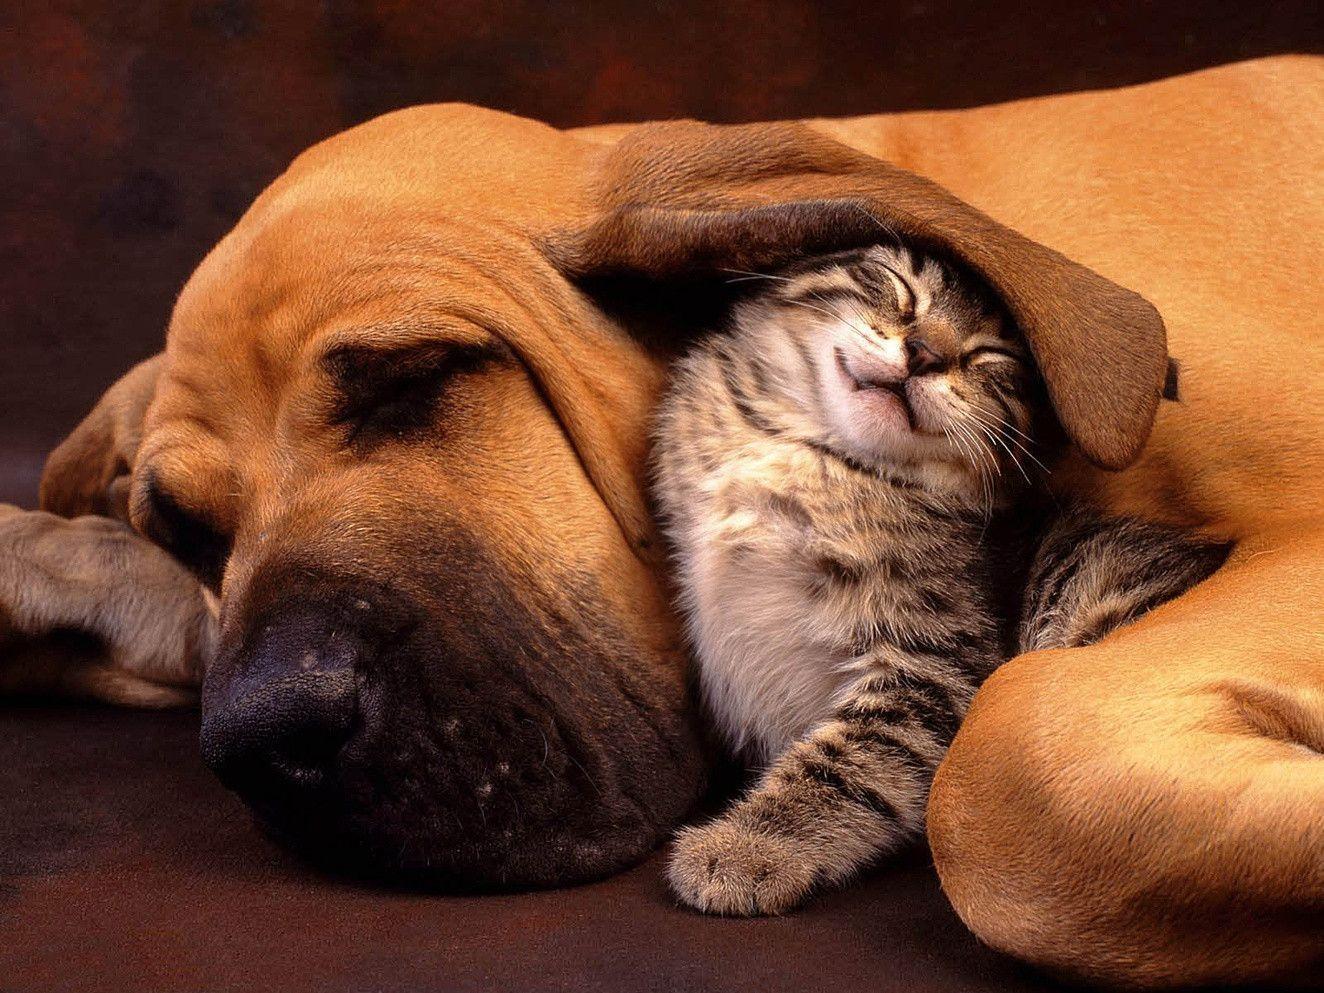 Cats And Dogs Wallpapers - Wallpaper Cave